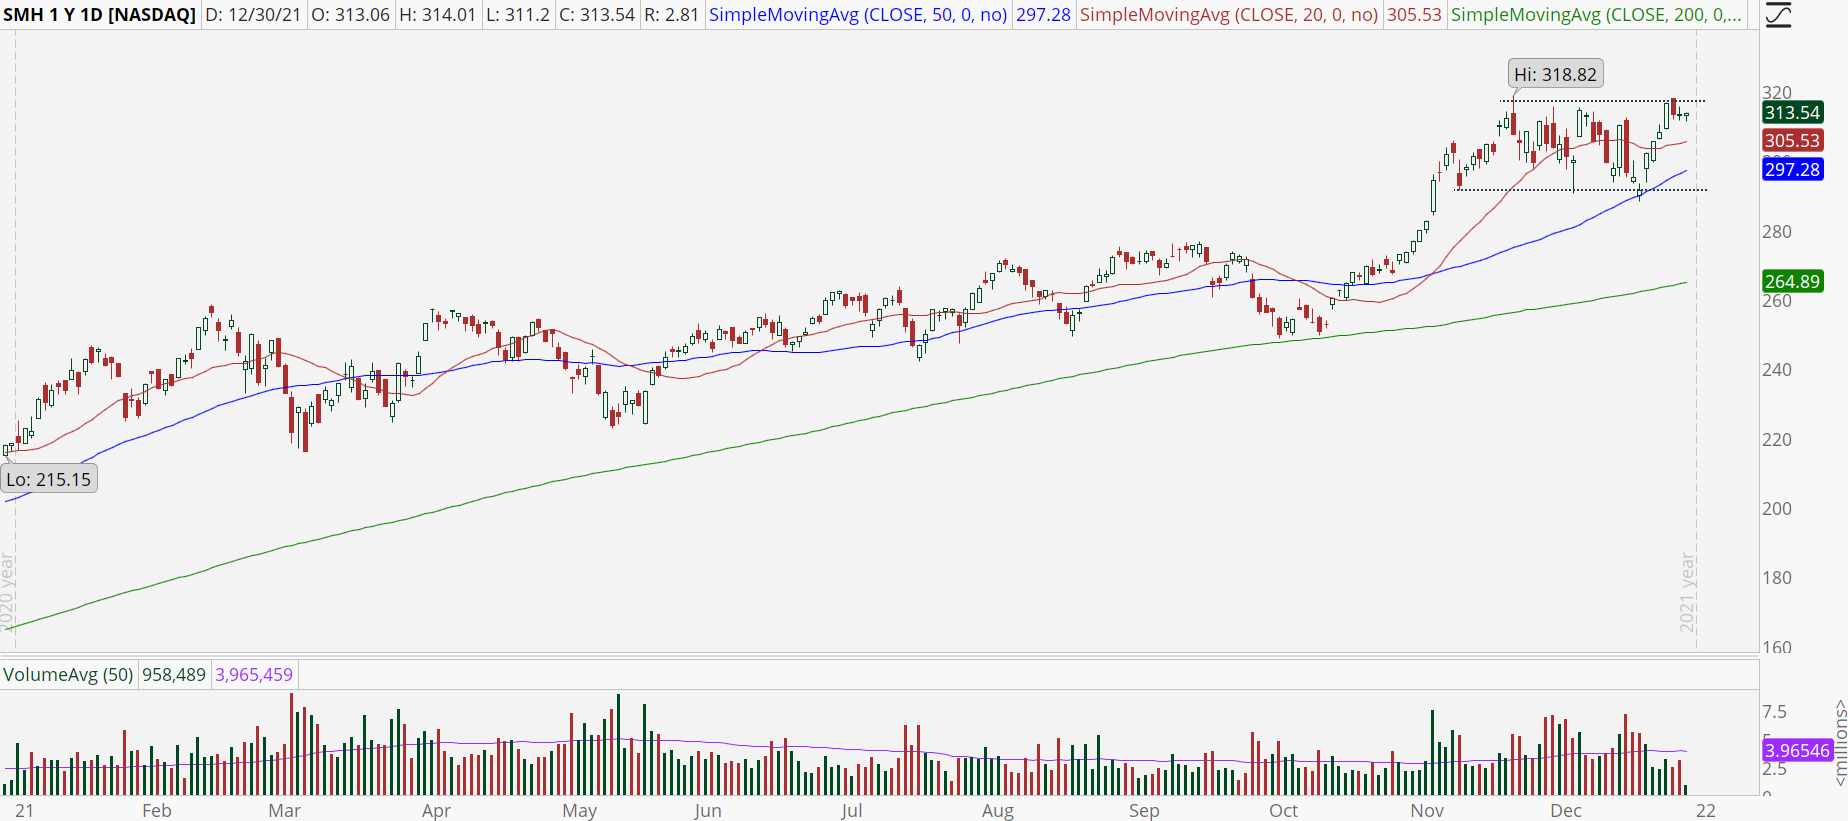 VanEck Semiconductor ETF (SMH) with base breakout.